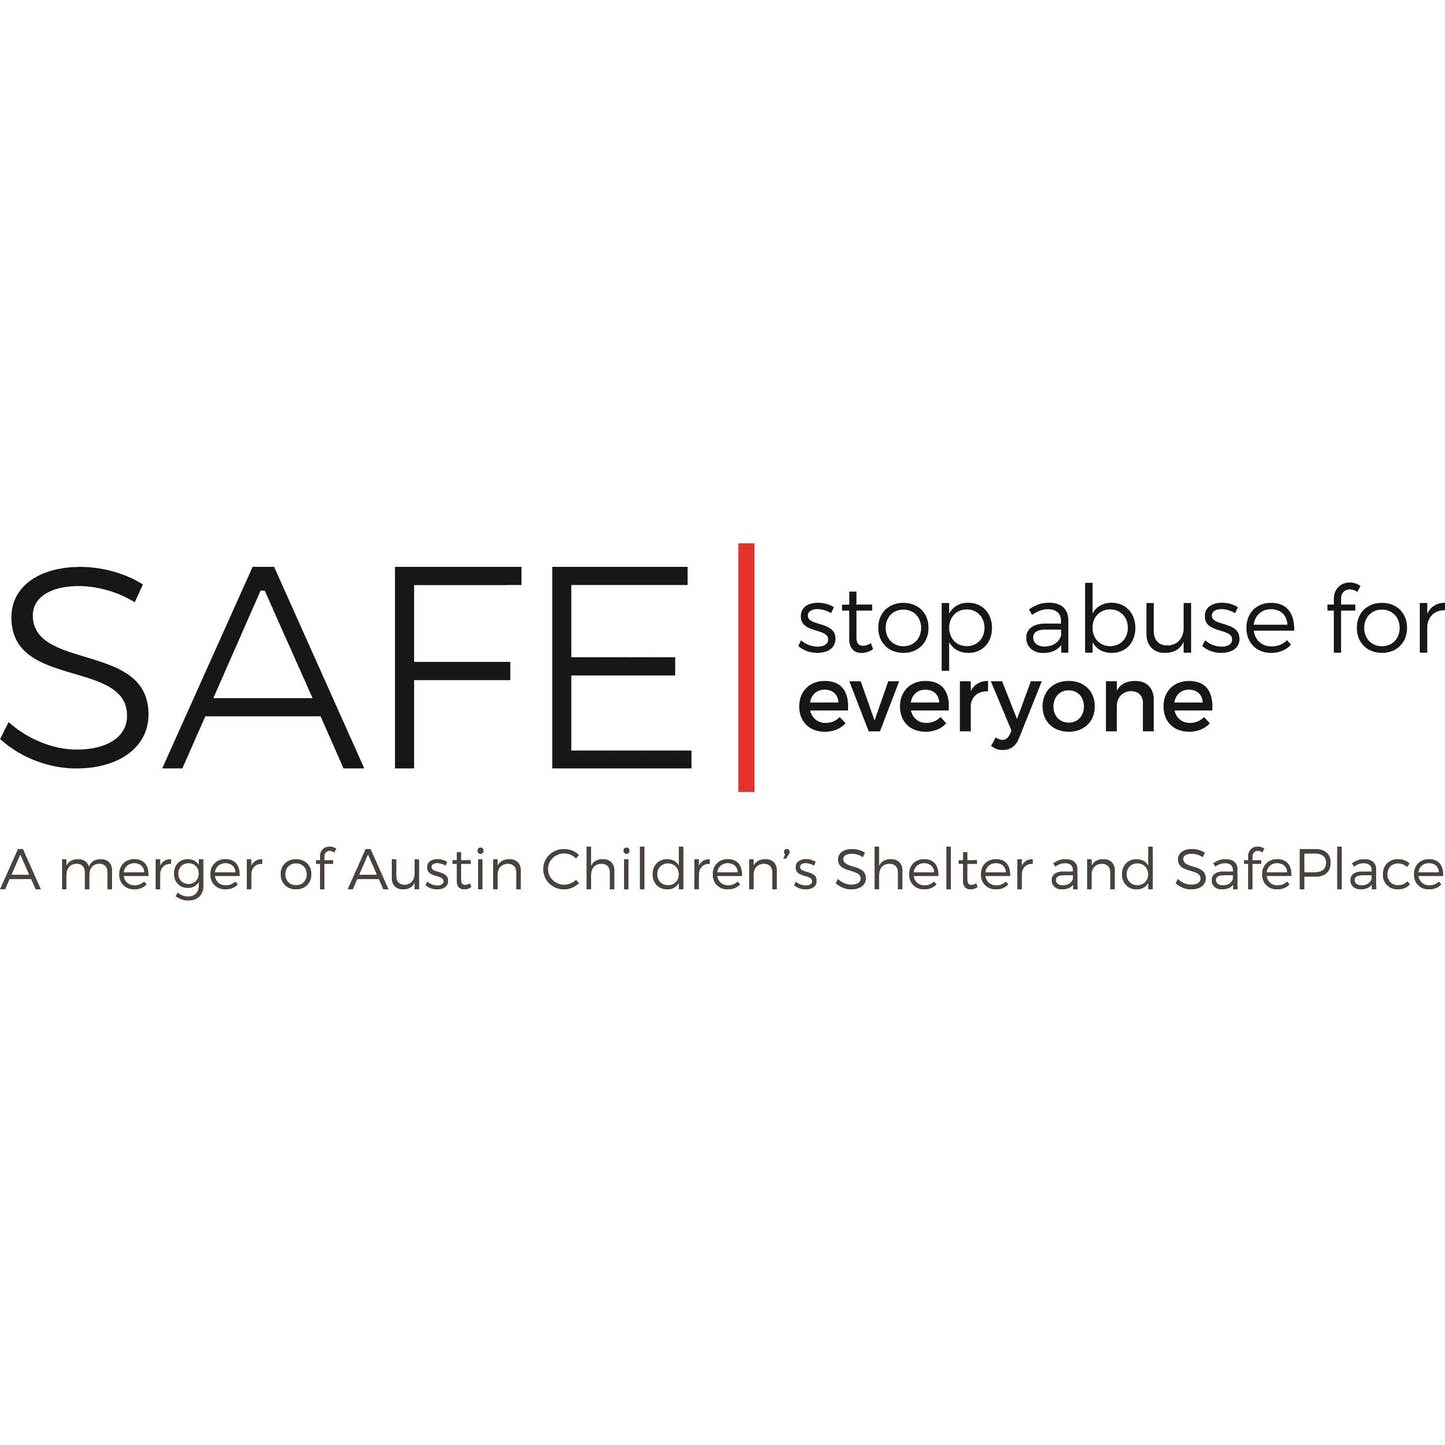 SAFE - stop abuse for everyone - A merger of Austin Children's Shelter and SafePlace